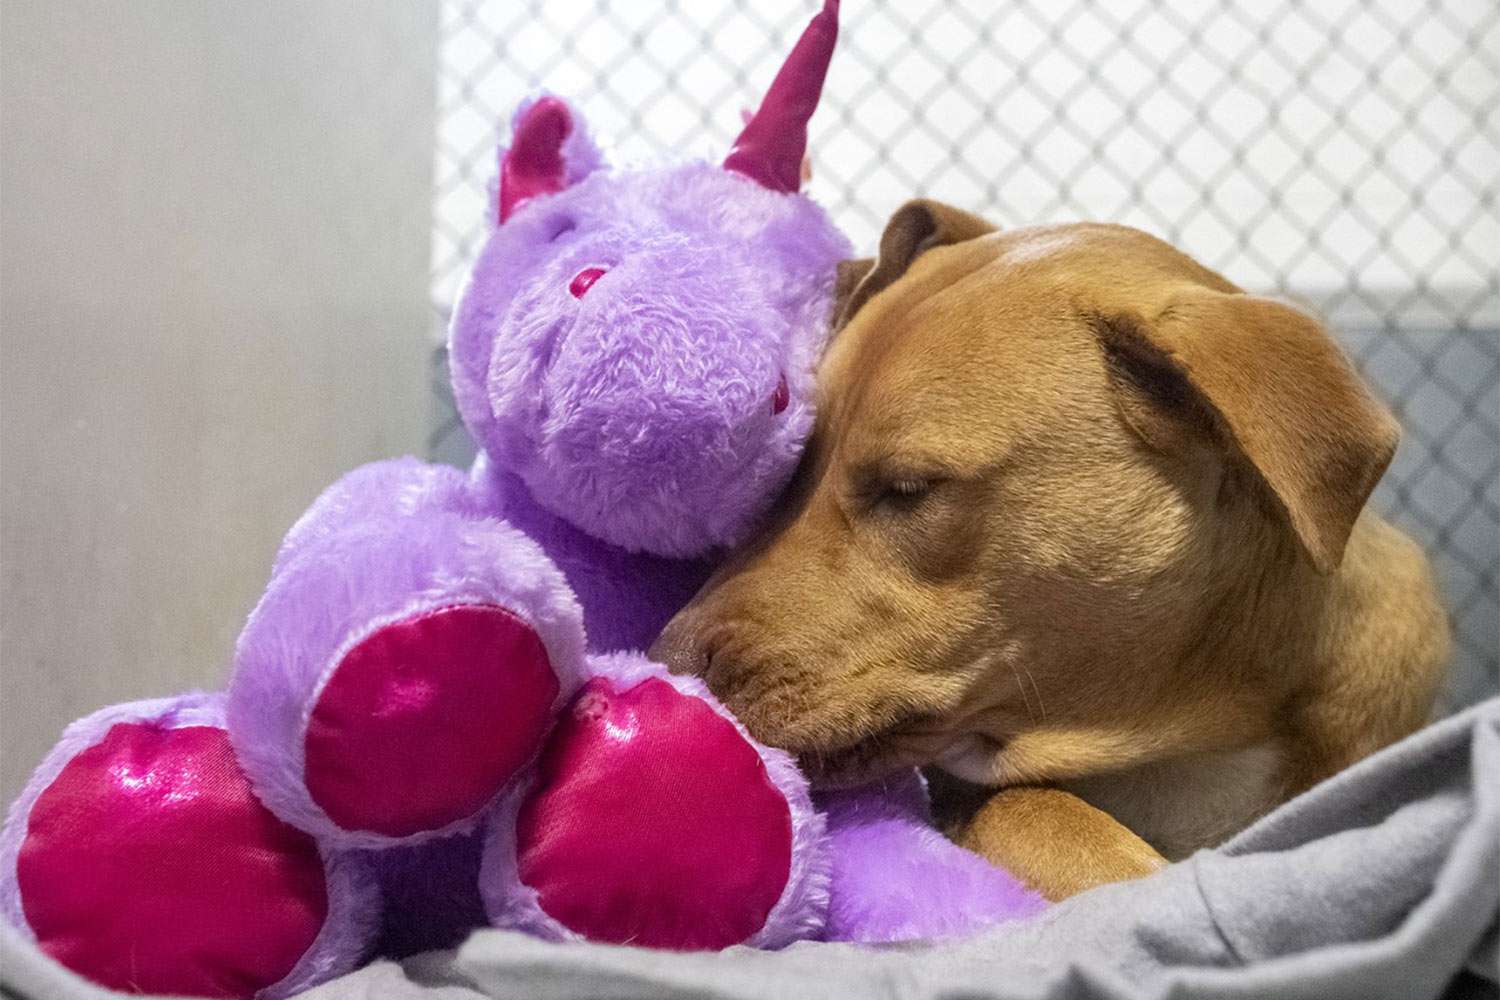 Stray Dog Gets Unicorn Plush He Kept Trying to Steal